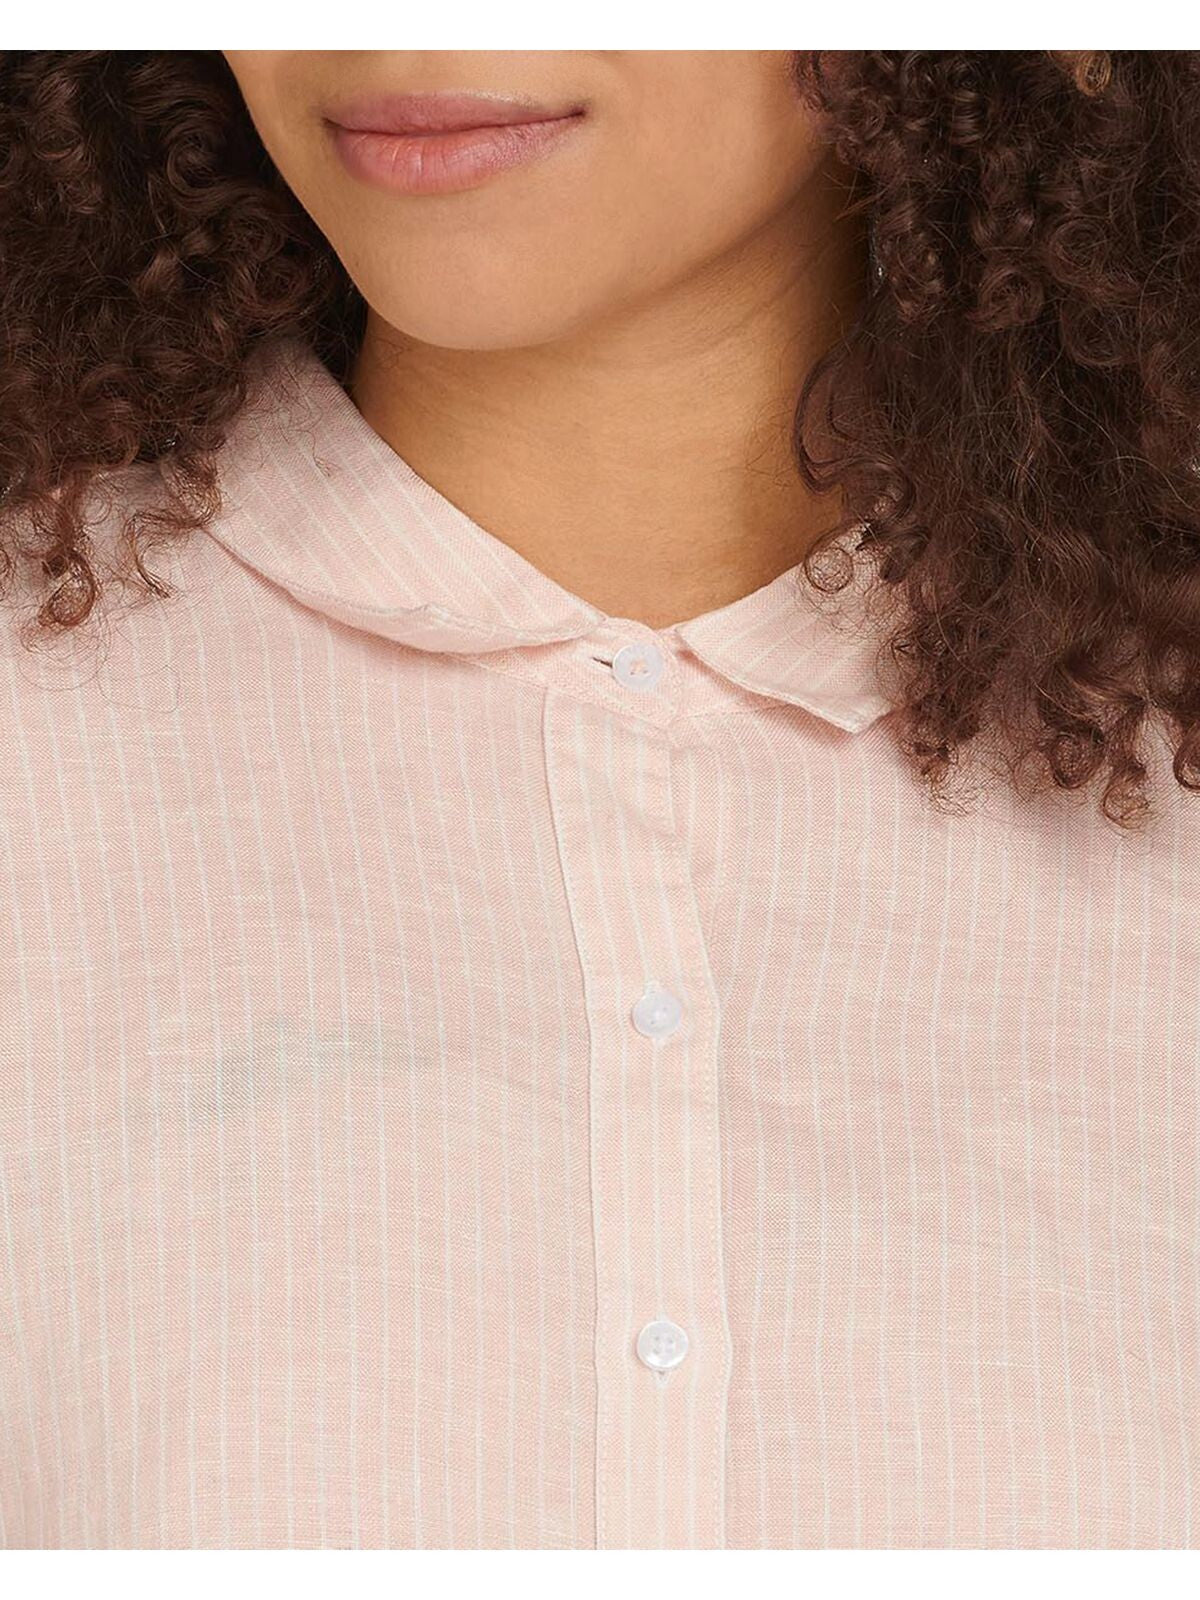 BARBOUR Womens Pink Pinstripe Point Collar Button Up Top 8